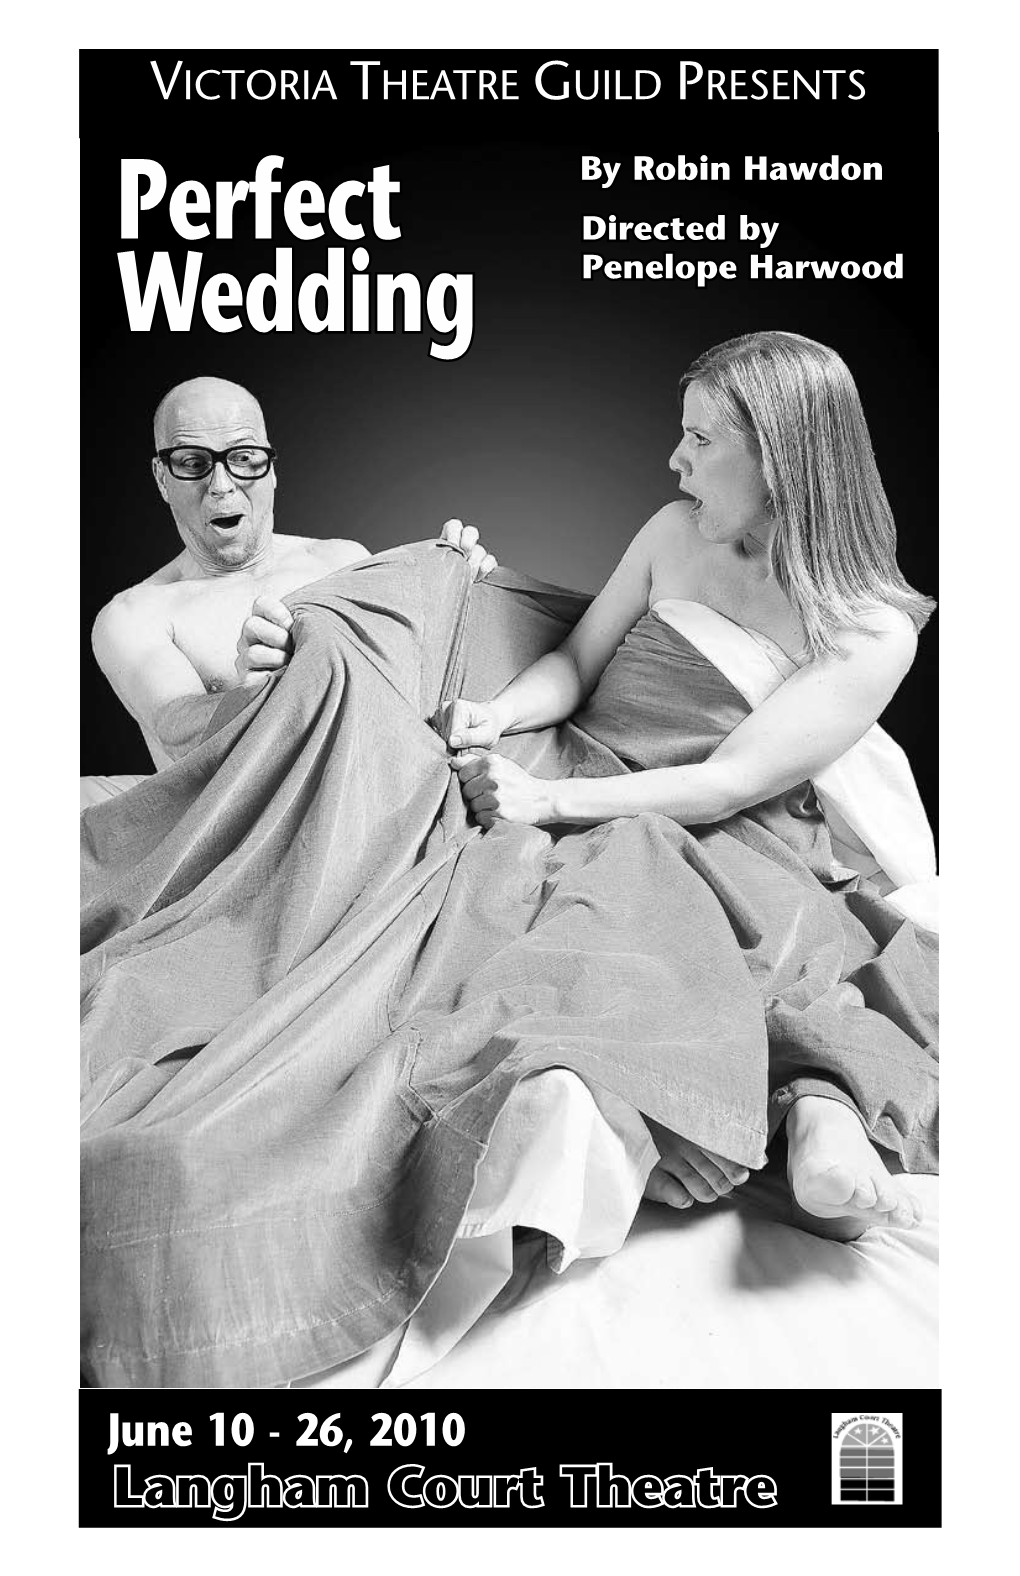 Perfect Wedding Is a Comic Romp: It Is a Funny Story About a Groom, a Bride and Their Wedding Day